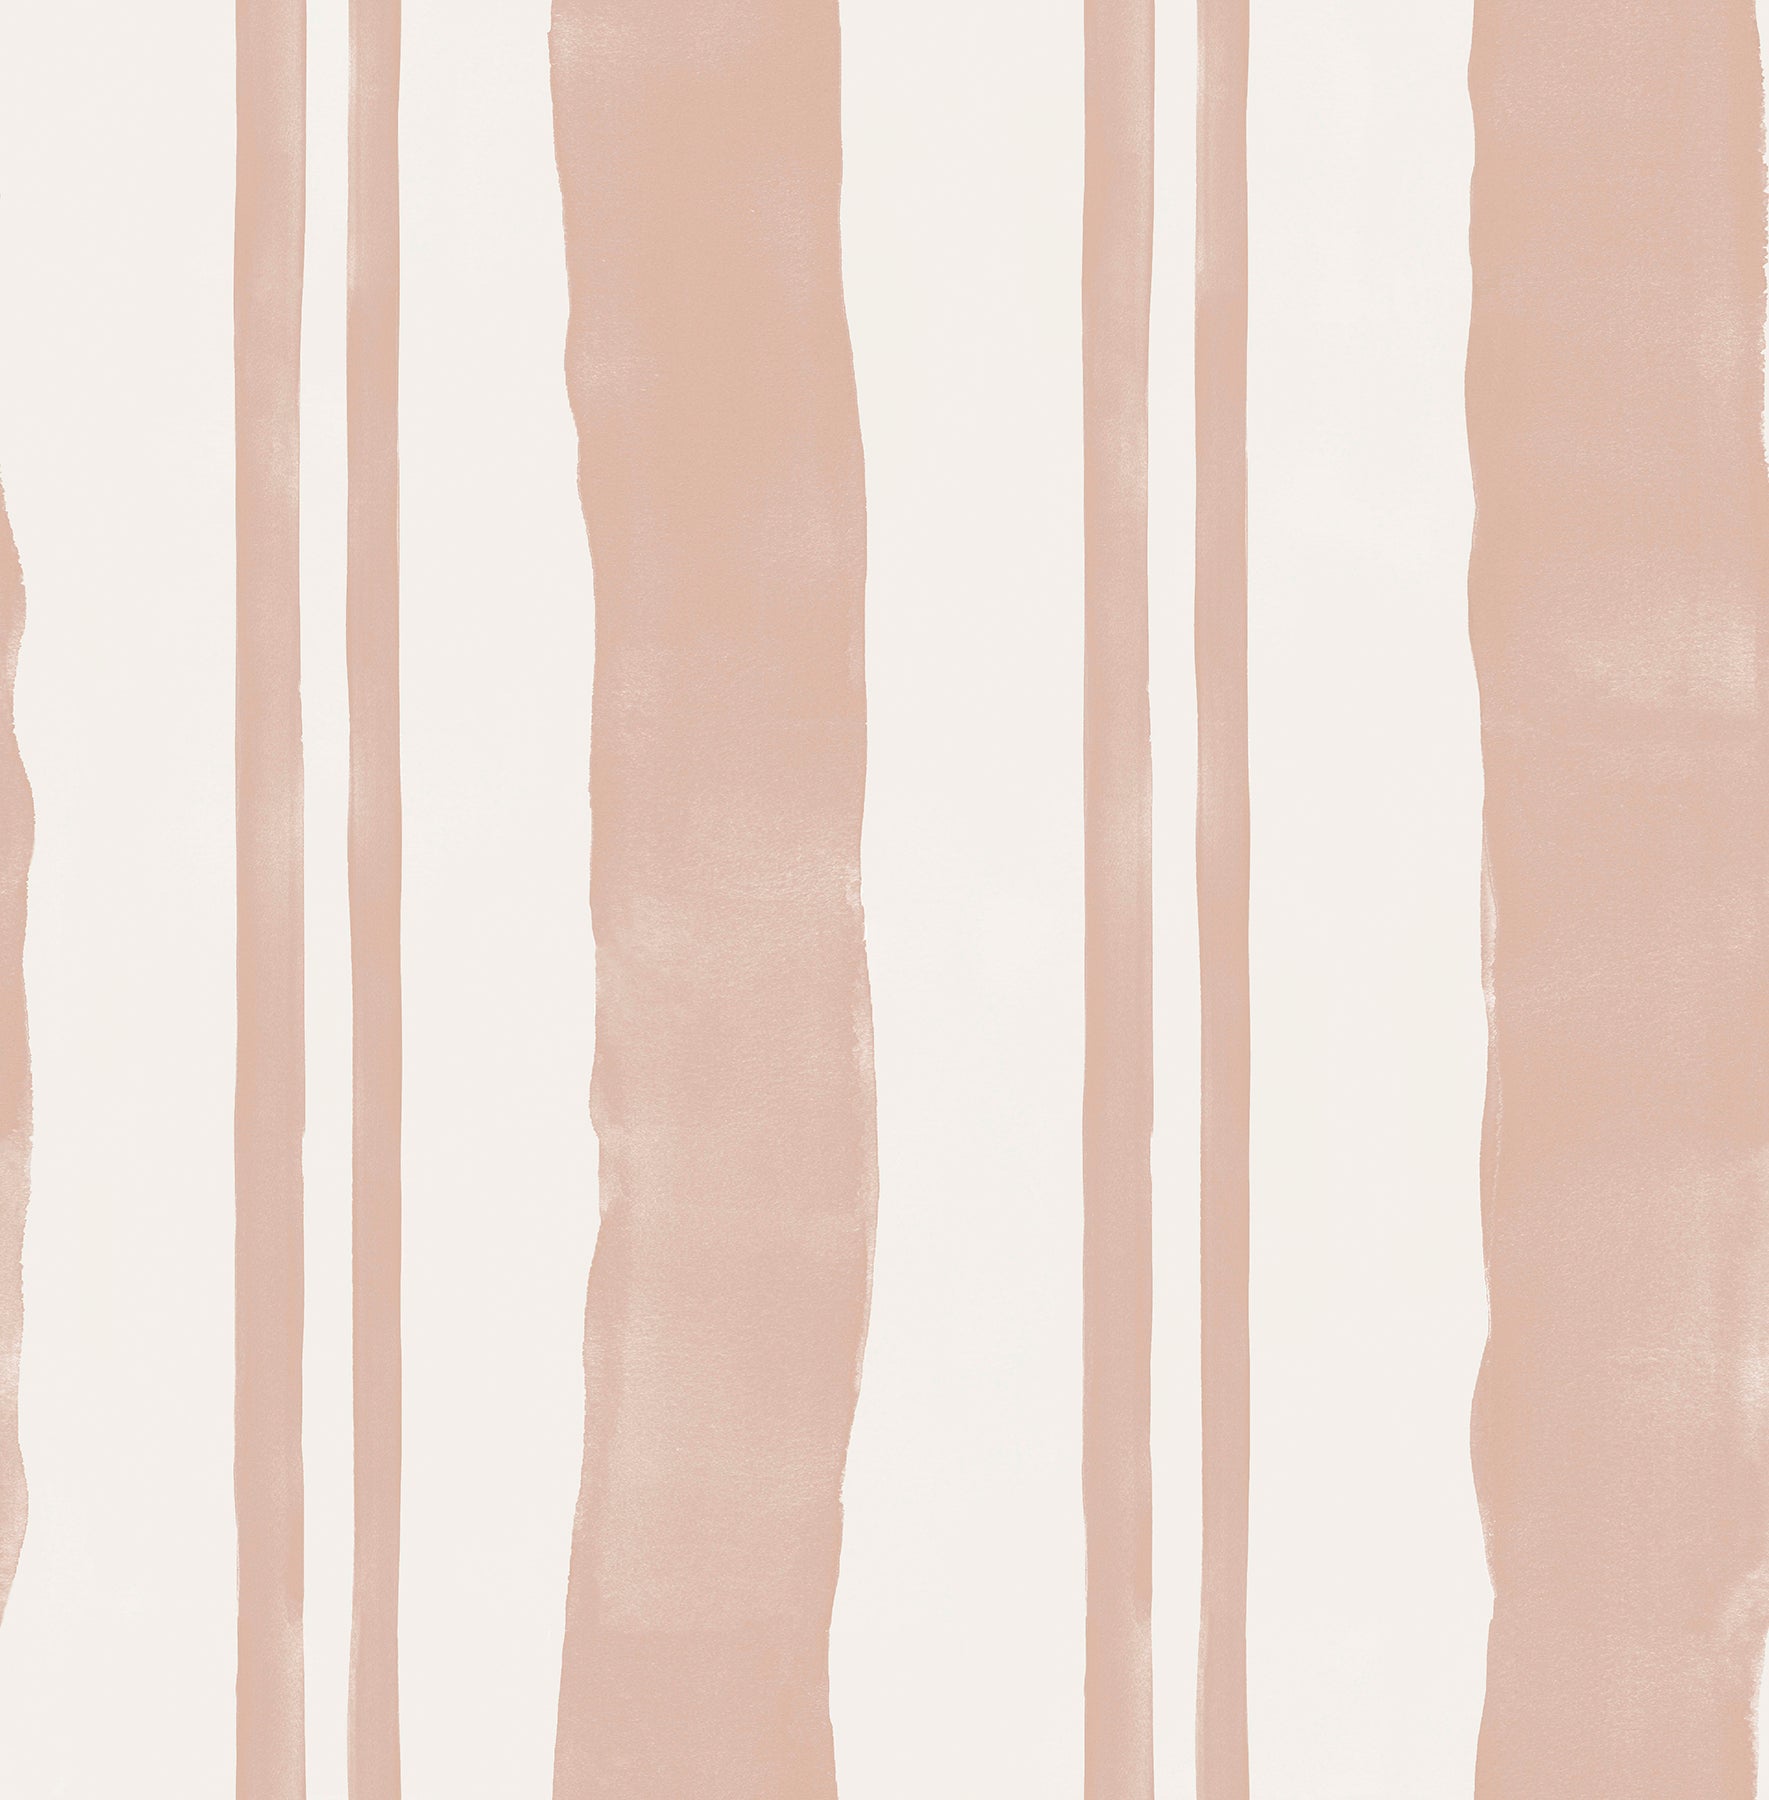 Mr. Kate Winston Watercolor Stripe Peel and Stick Wallpaper Peel and Stick Wallpaper RoomMates Roll Potter's Clay Peach 